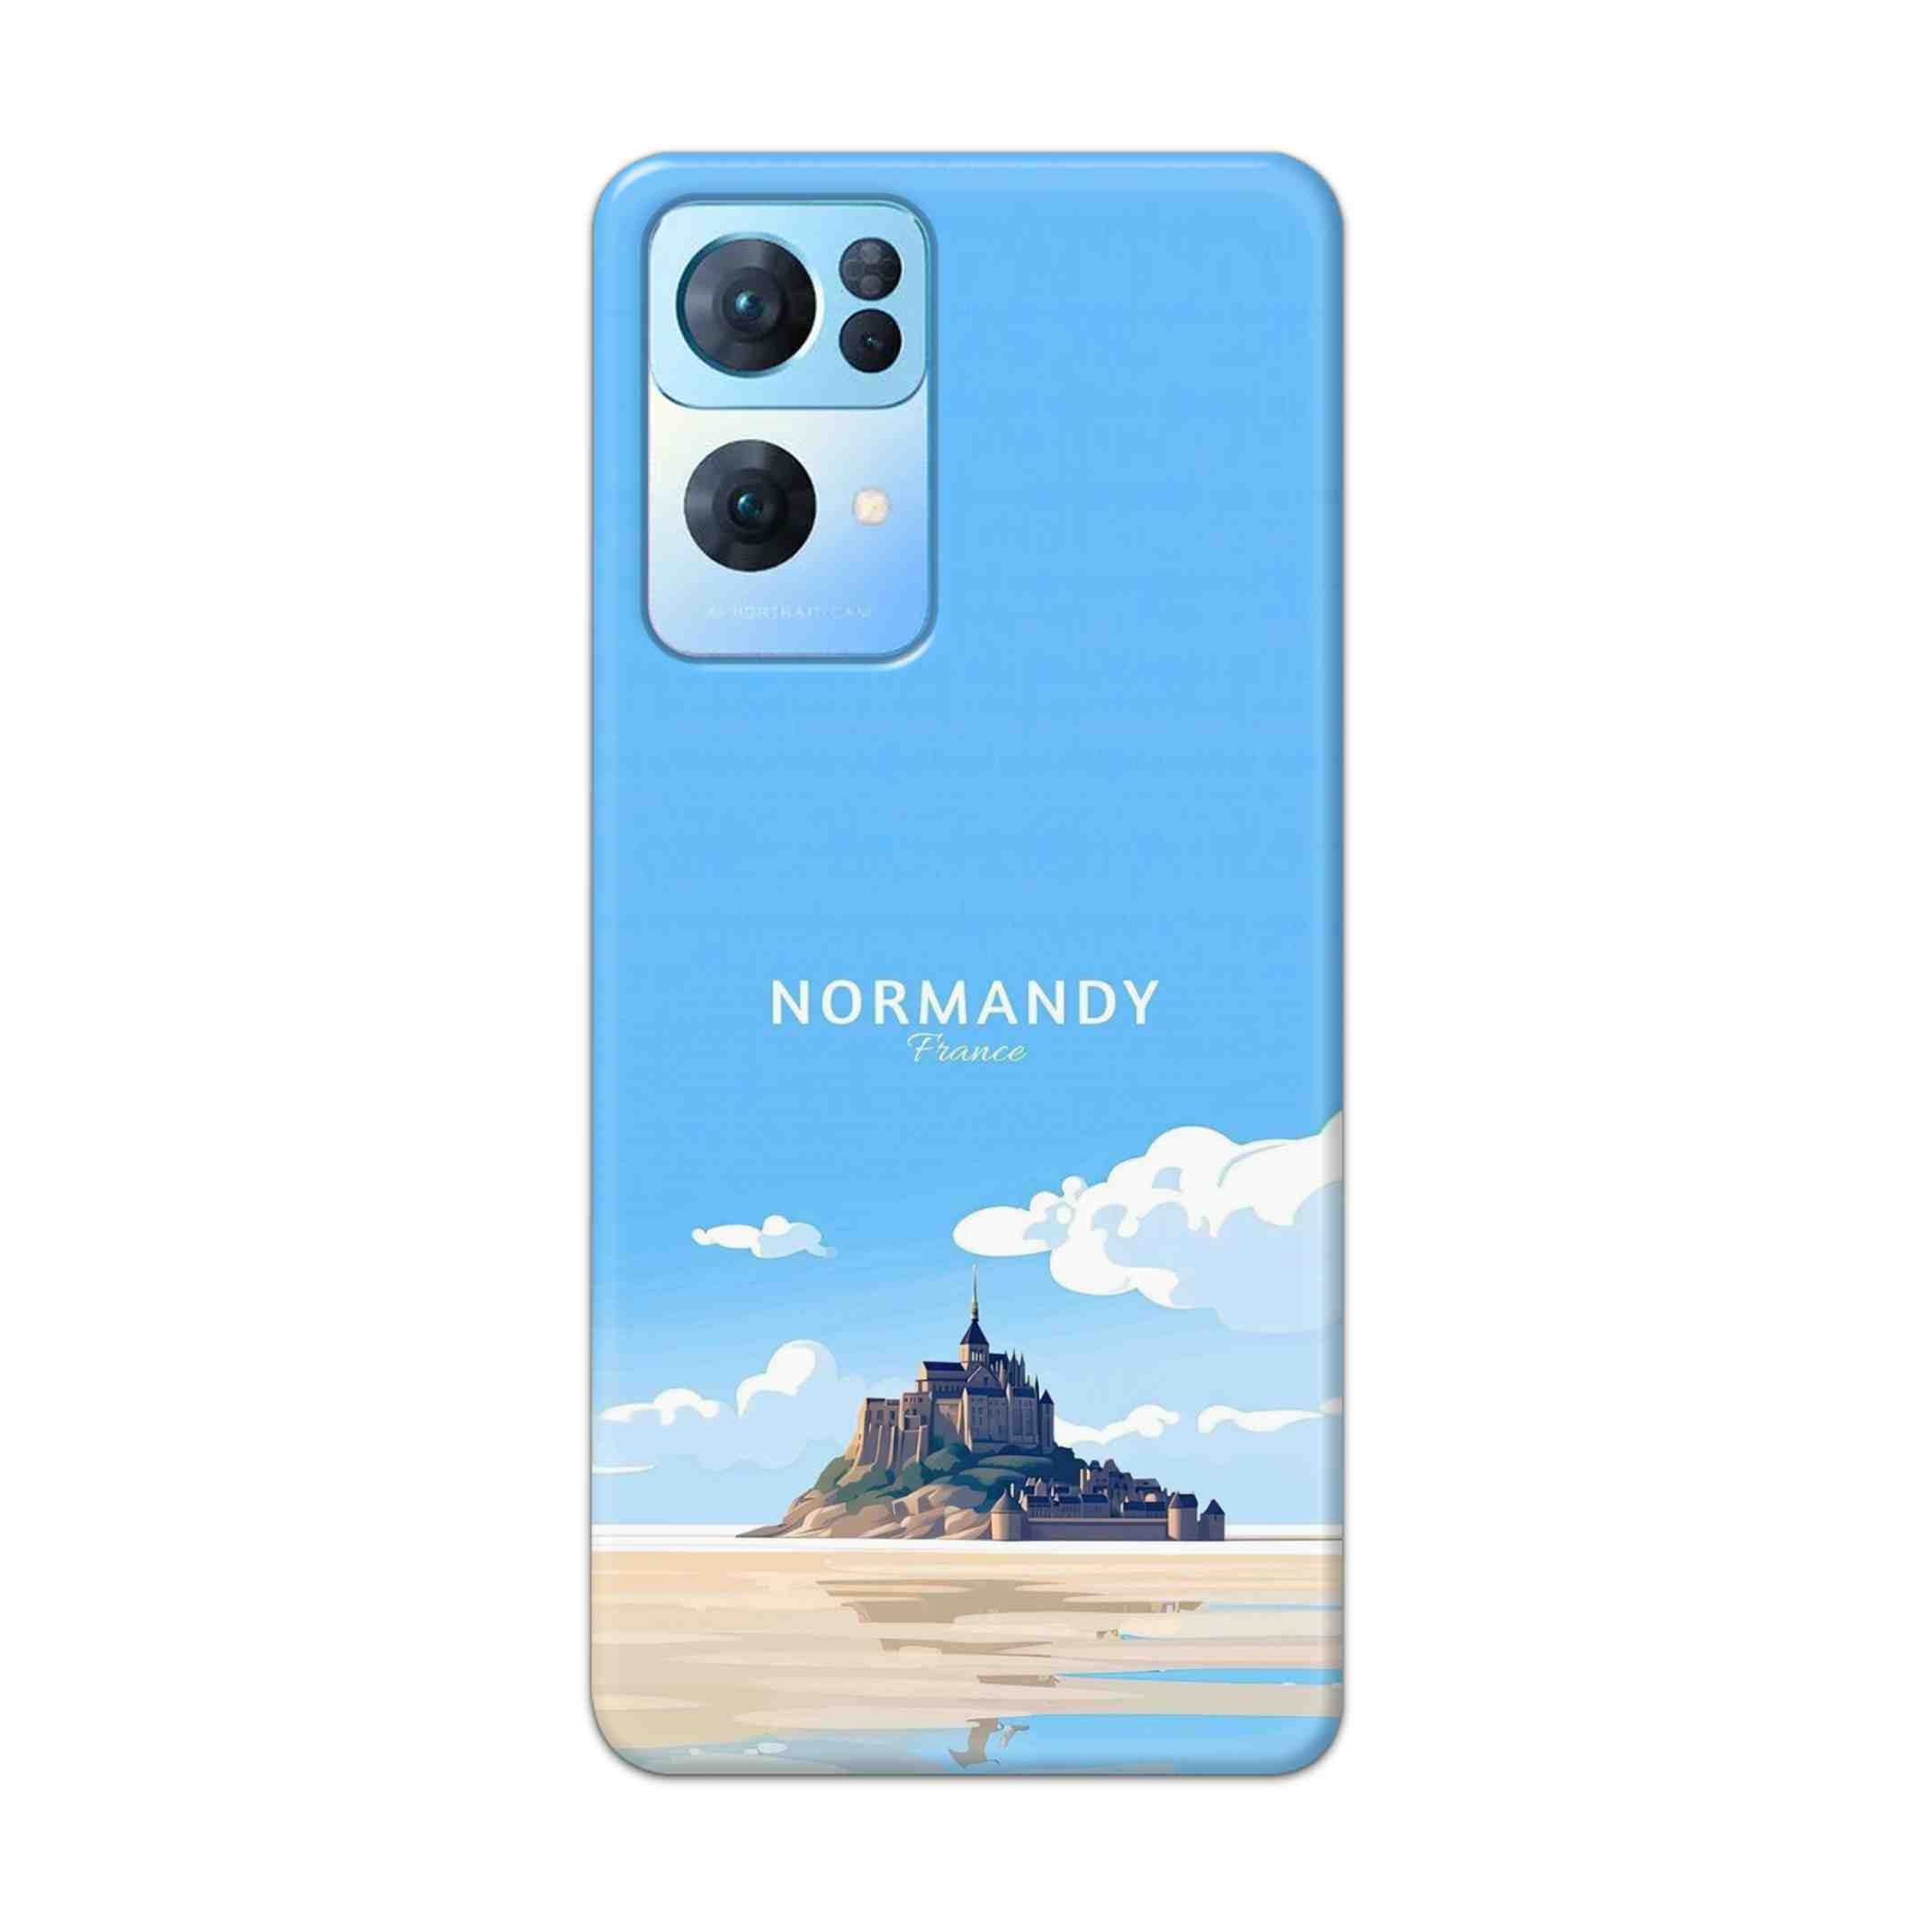 Buy Normandy Hard Back Mobile Phone Case Cover For Oppo Reno 7 Pro Online